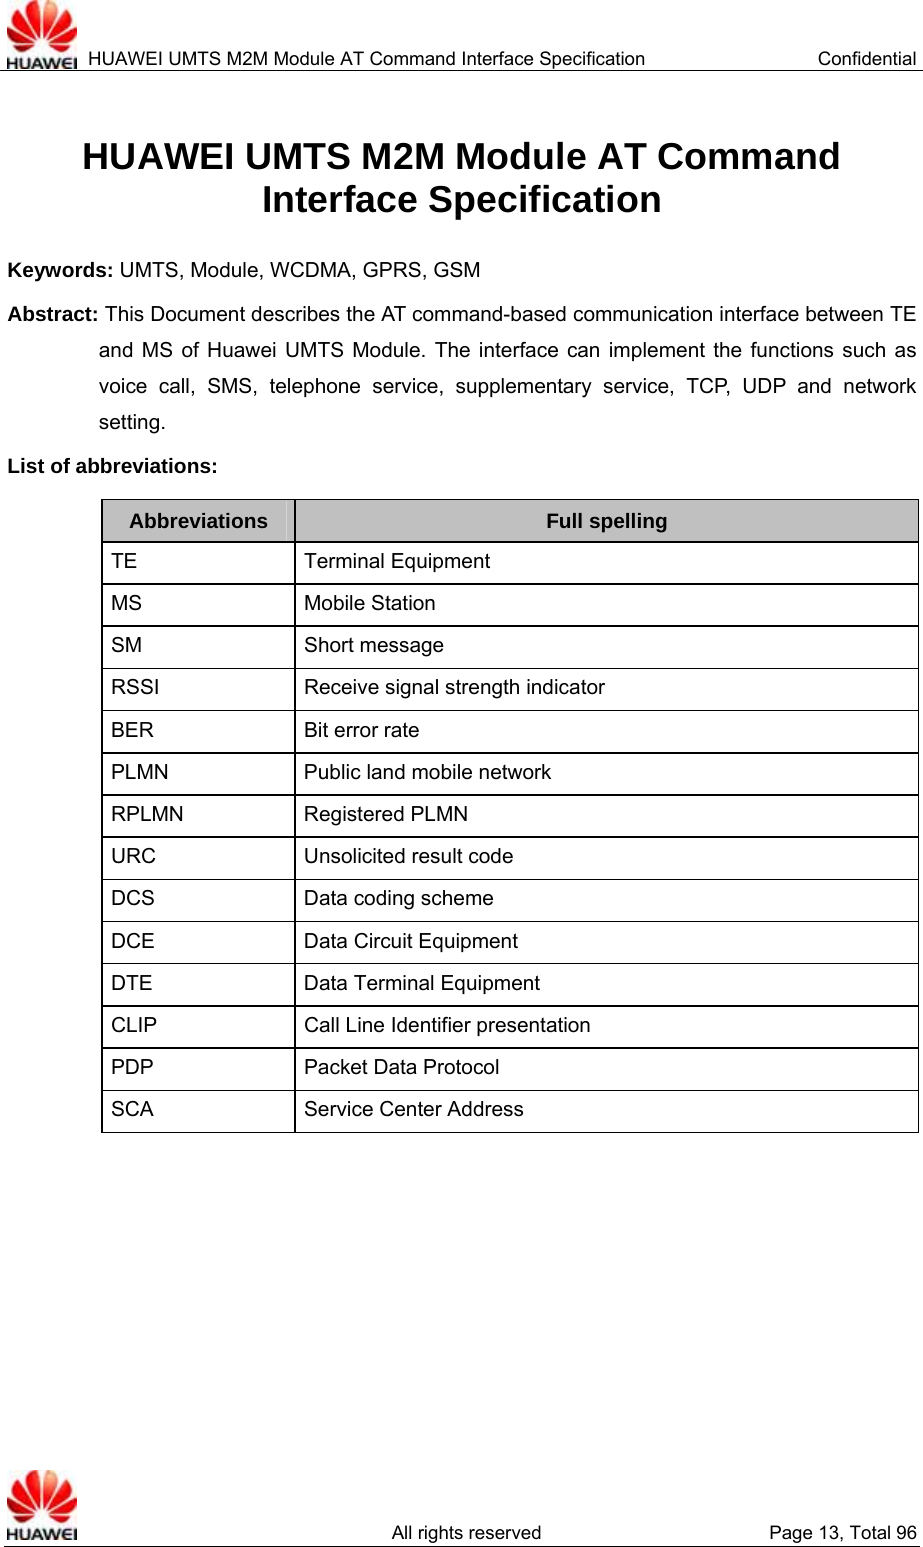  HUAWEI UMTS M2M Module AT Command Interface Specification  Confidential   All rights reserved  Page 13, Total 96 HUAWEI UMTS M2M Module AT Command   Interface Specification Keywords: UMTS, Module, WCDMA, GPRS, GSM Abstract: This Document describes the AT command-based communication interface between TE and MS of Huawei UMTS Module. The interface can implement the functions such as voice call, SMS, telephone service, supplementary service, TCP, UDP and network setting.   List of abbreviations:   Abbreviations  Full spelling TE Terminal Equipment MS Mobile Station SM Short message RSSI  Receive signal strength indicator BER Bit error rate PLMN  Public land mobile network RPLMN Registered PLMN URC  Unsolicited result code DCS  Data coding scheme DCE  Data Circuit Equipment DTE  Data Terminal Equipment CLIP  Call Line Identifier presentation PDP Packet Data Protocol SCA Service Center Address  